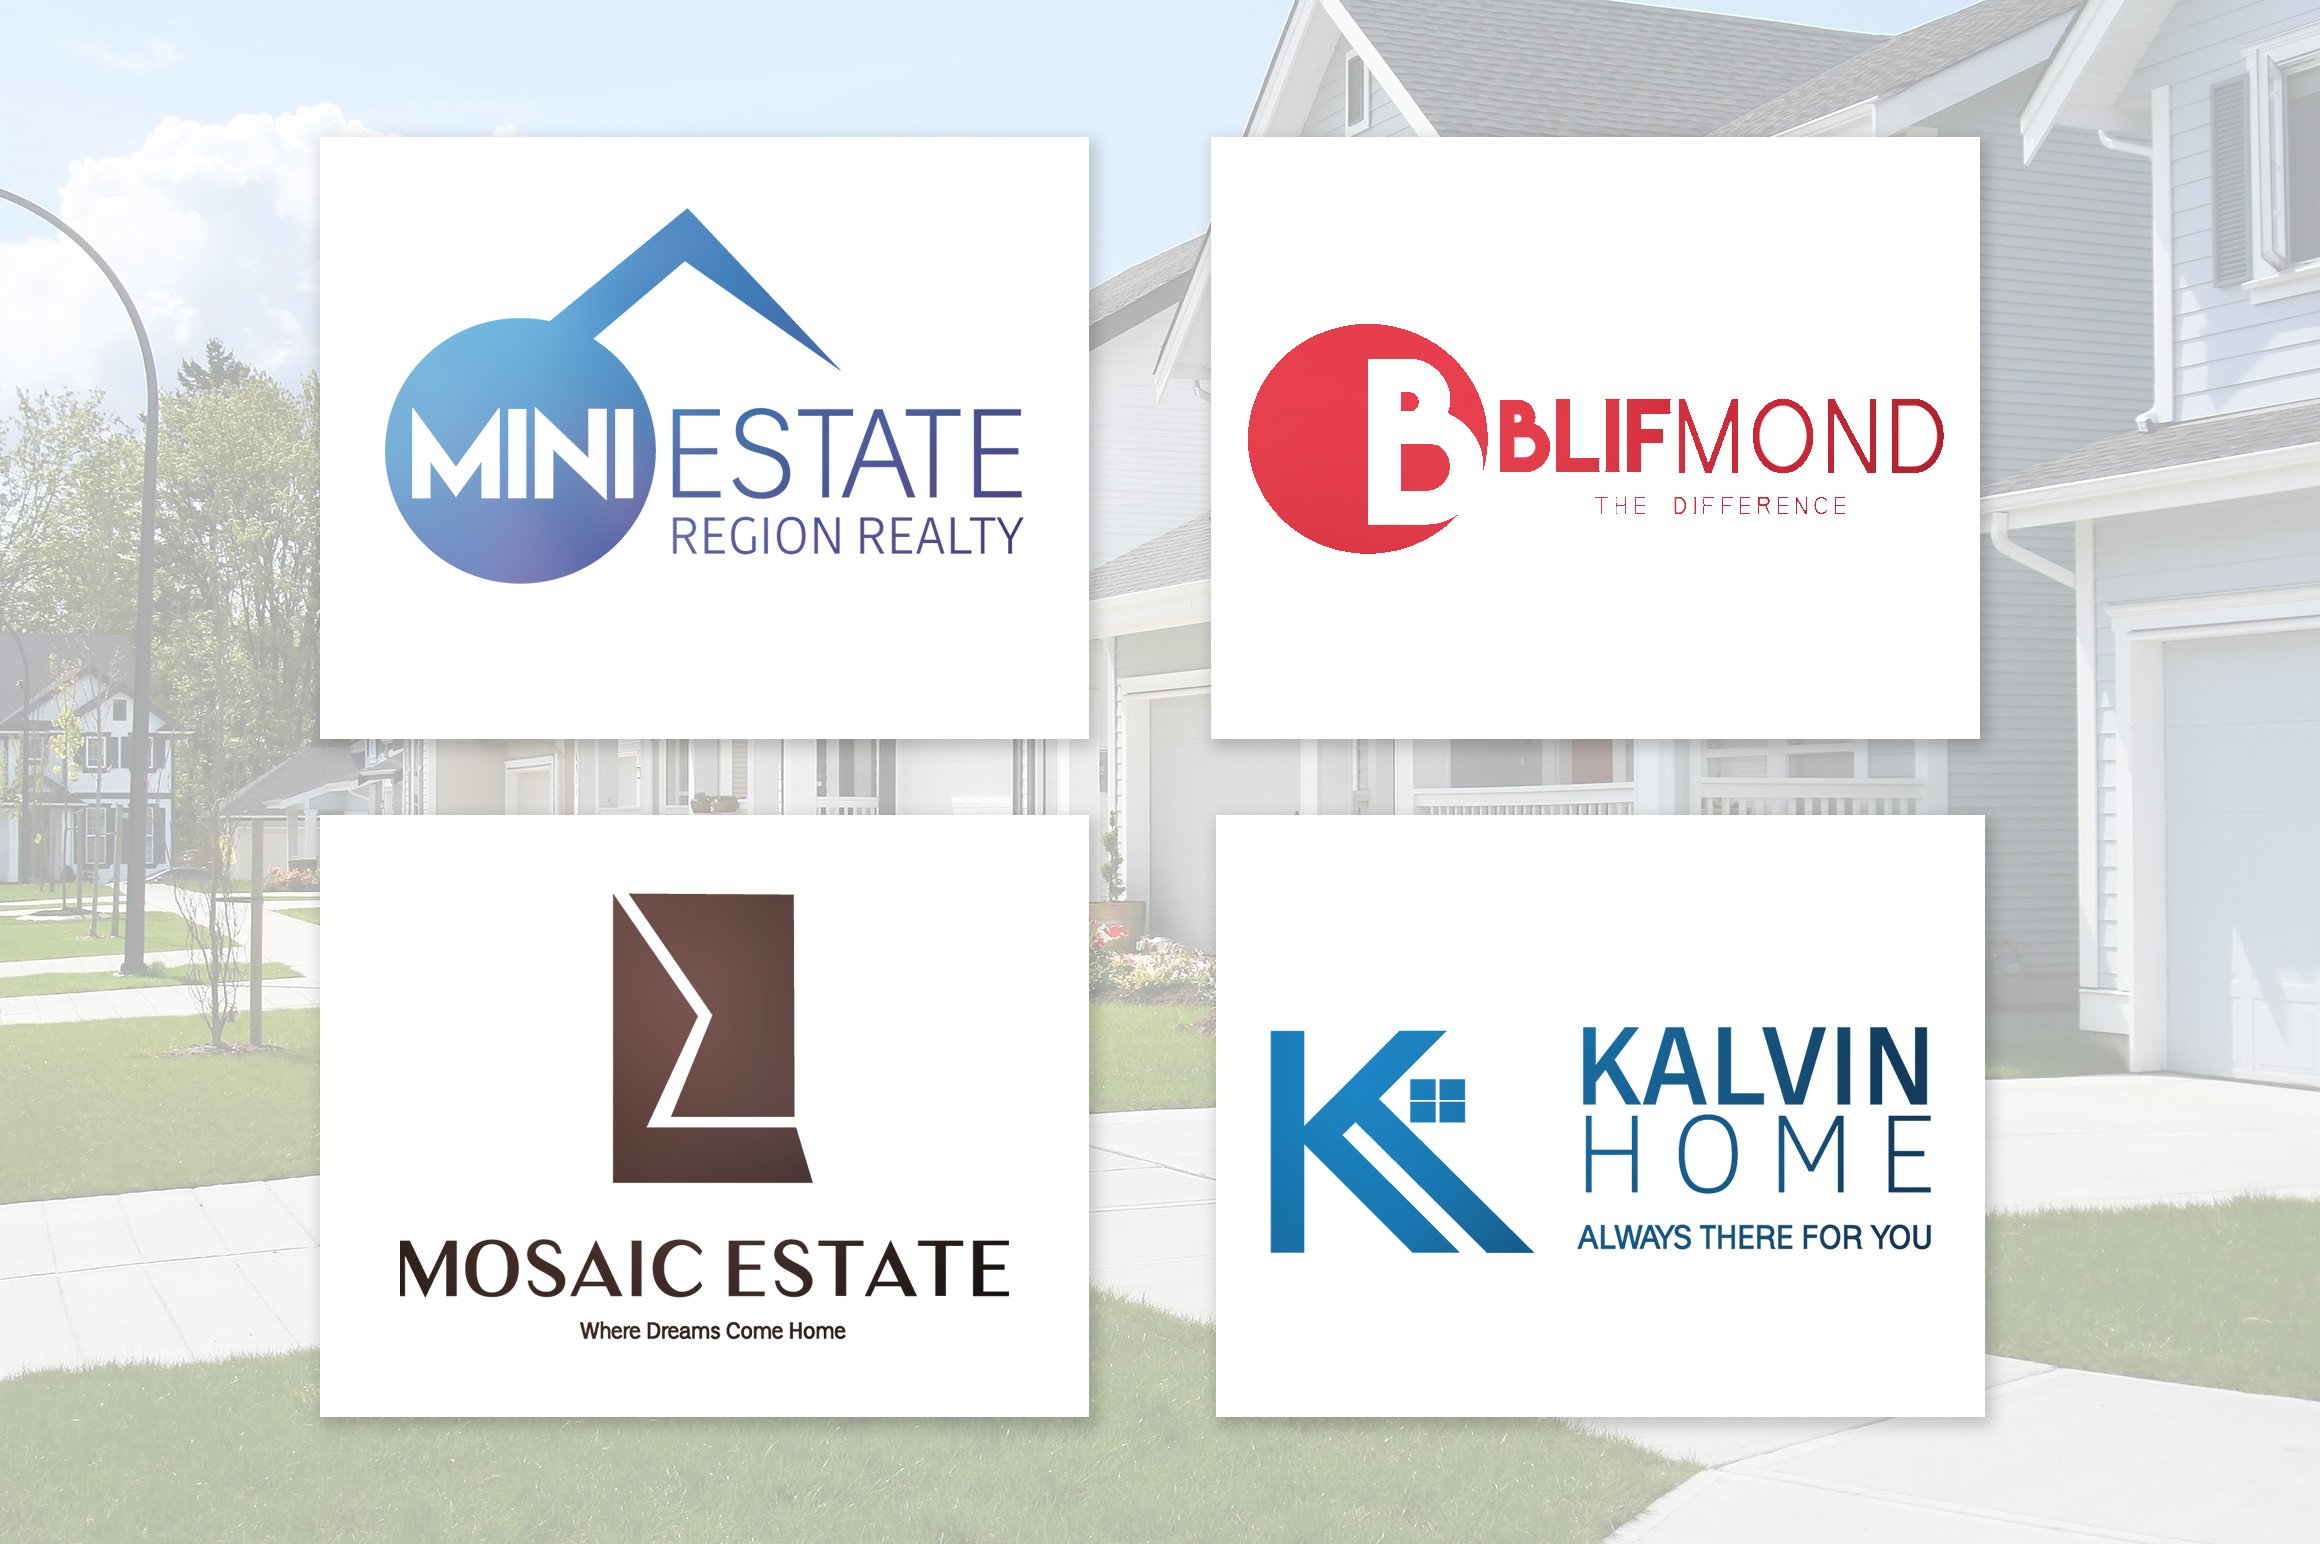 Classic real estate logos with understandable illustrations.